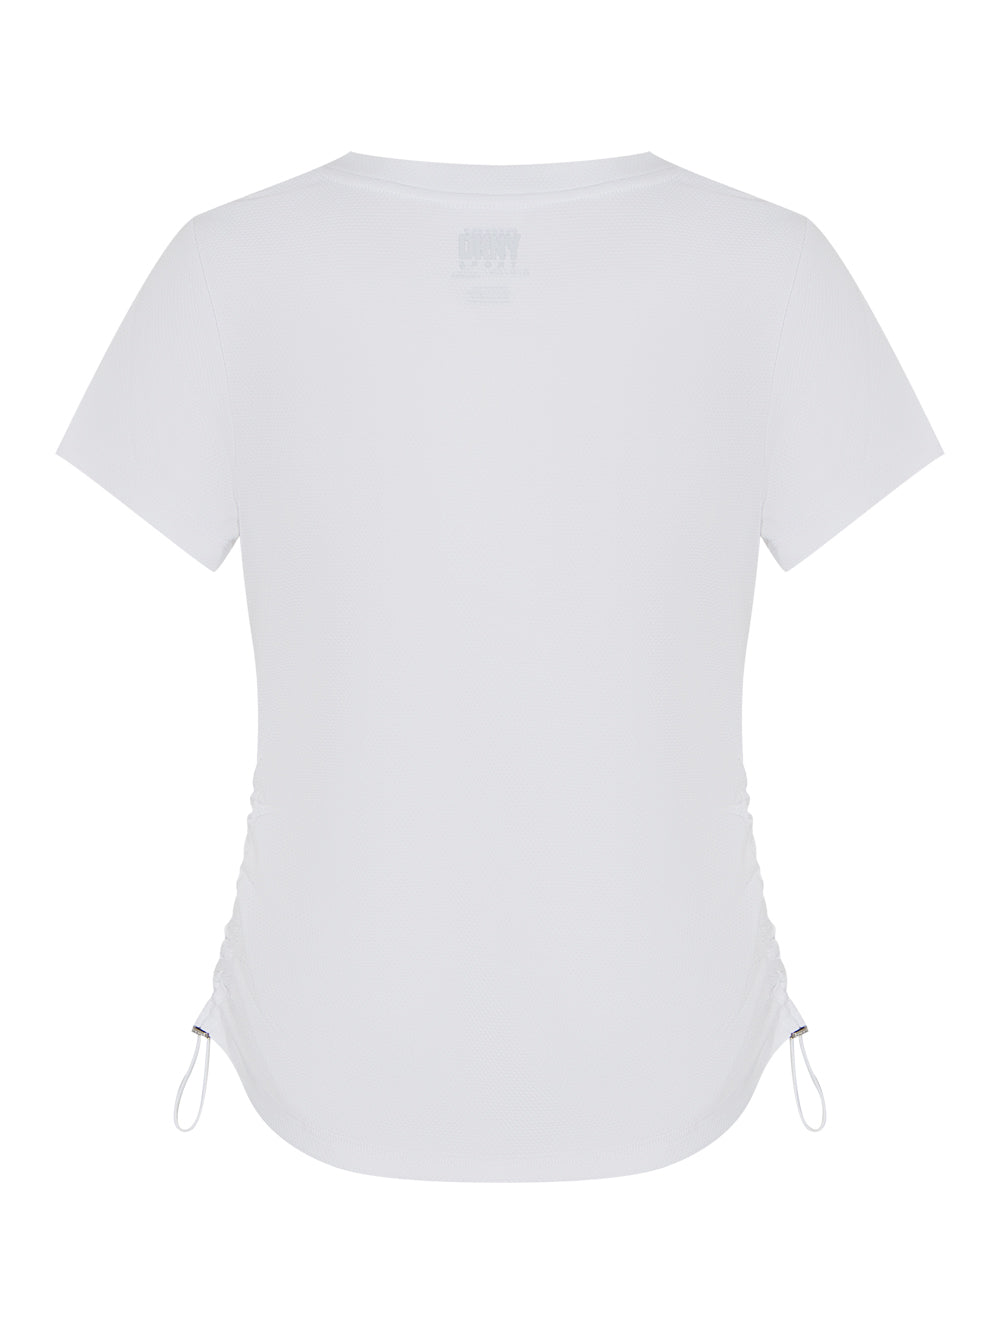 V-Neck Tech Tee With Ruched Side Seams (White)